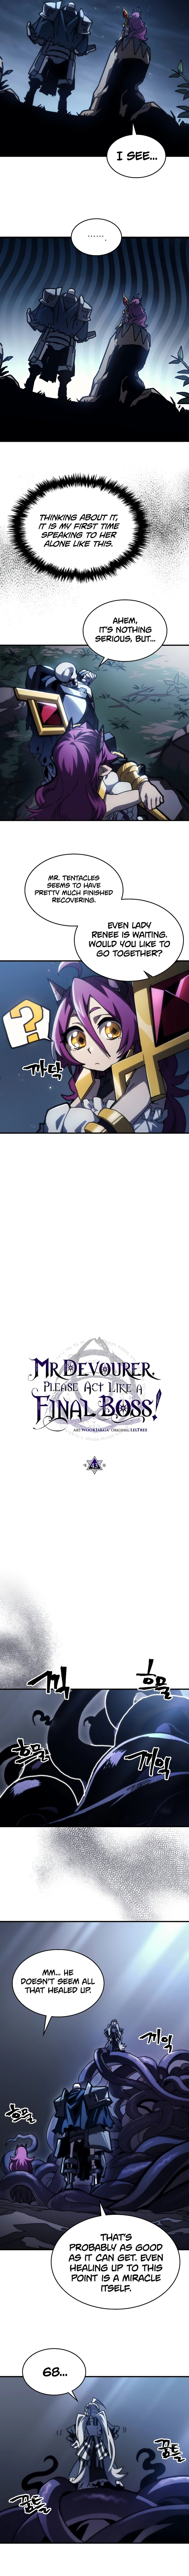 Mr Devourer, Please Act Like a Final Boss - Chapter 43 Page 3